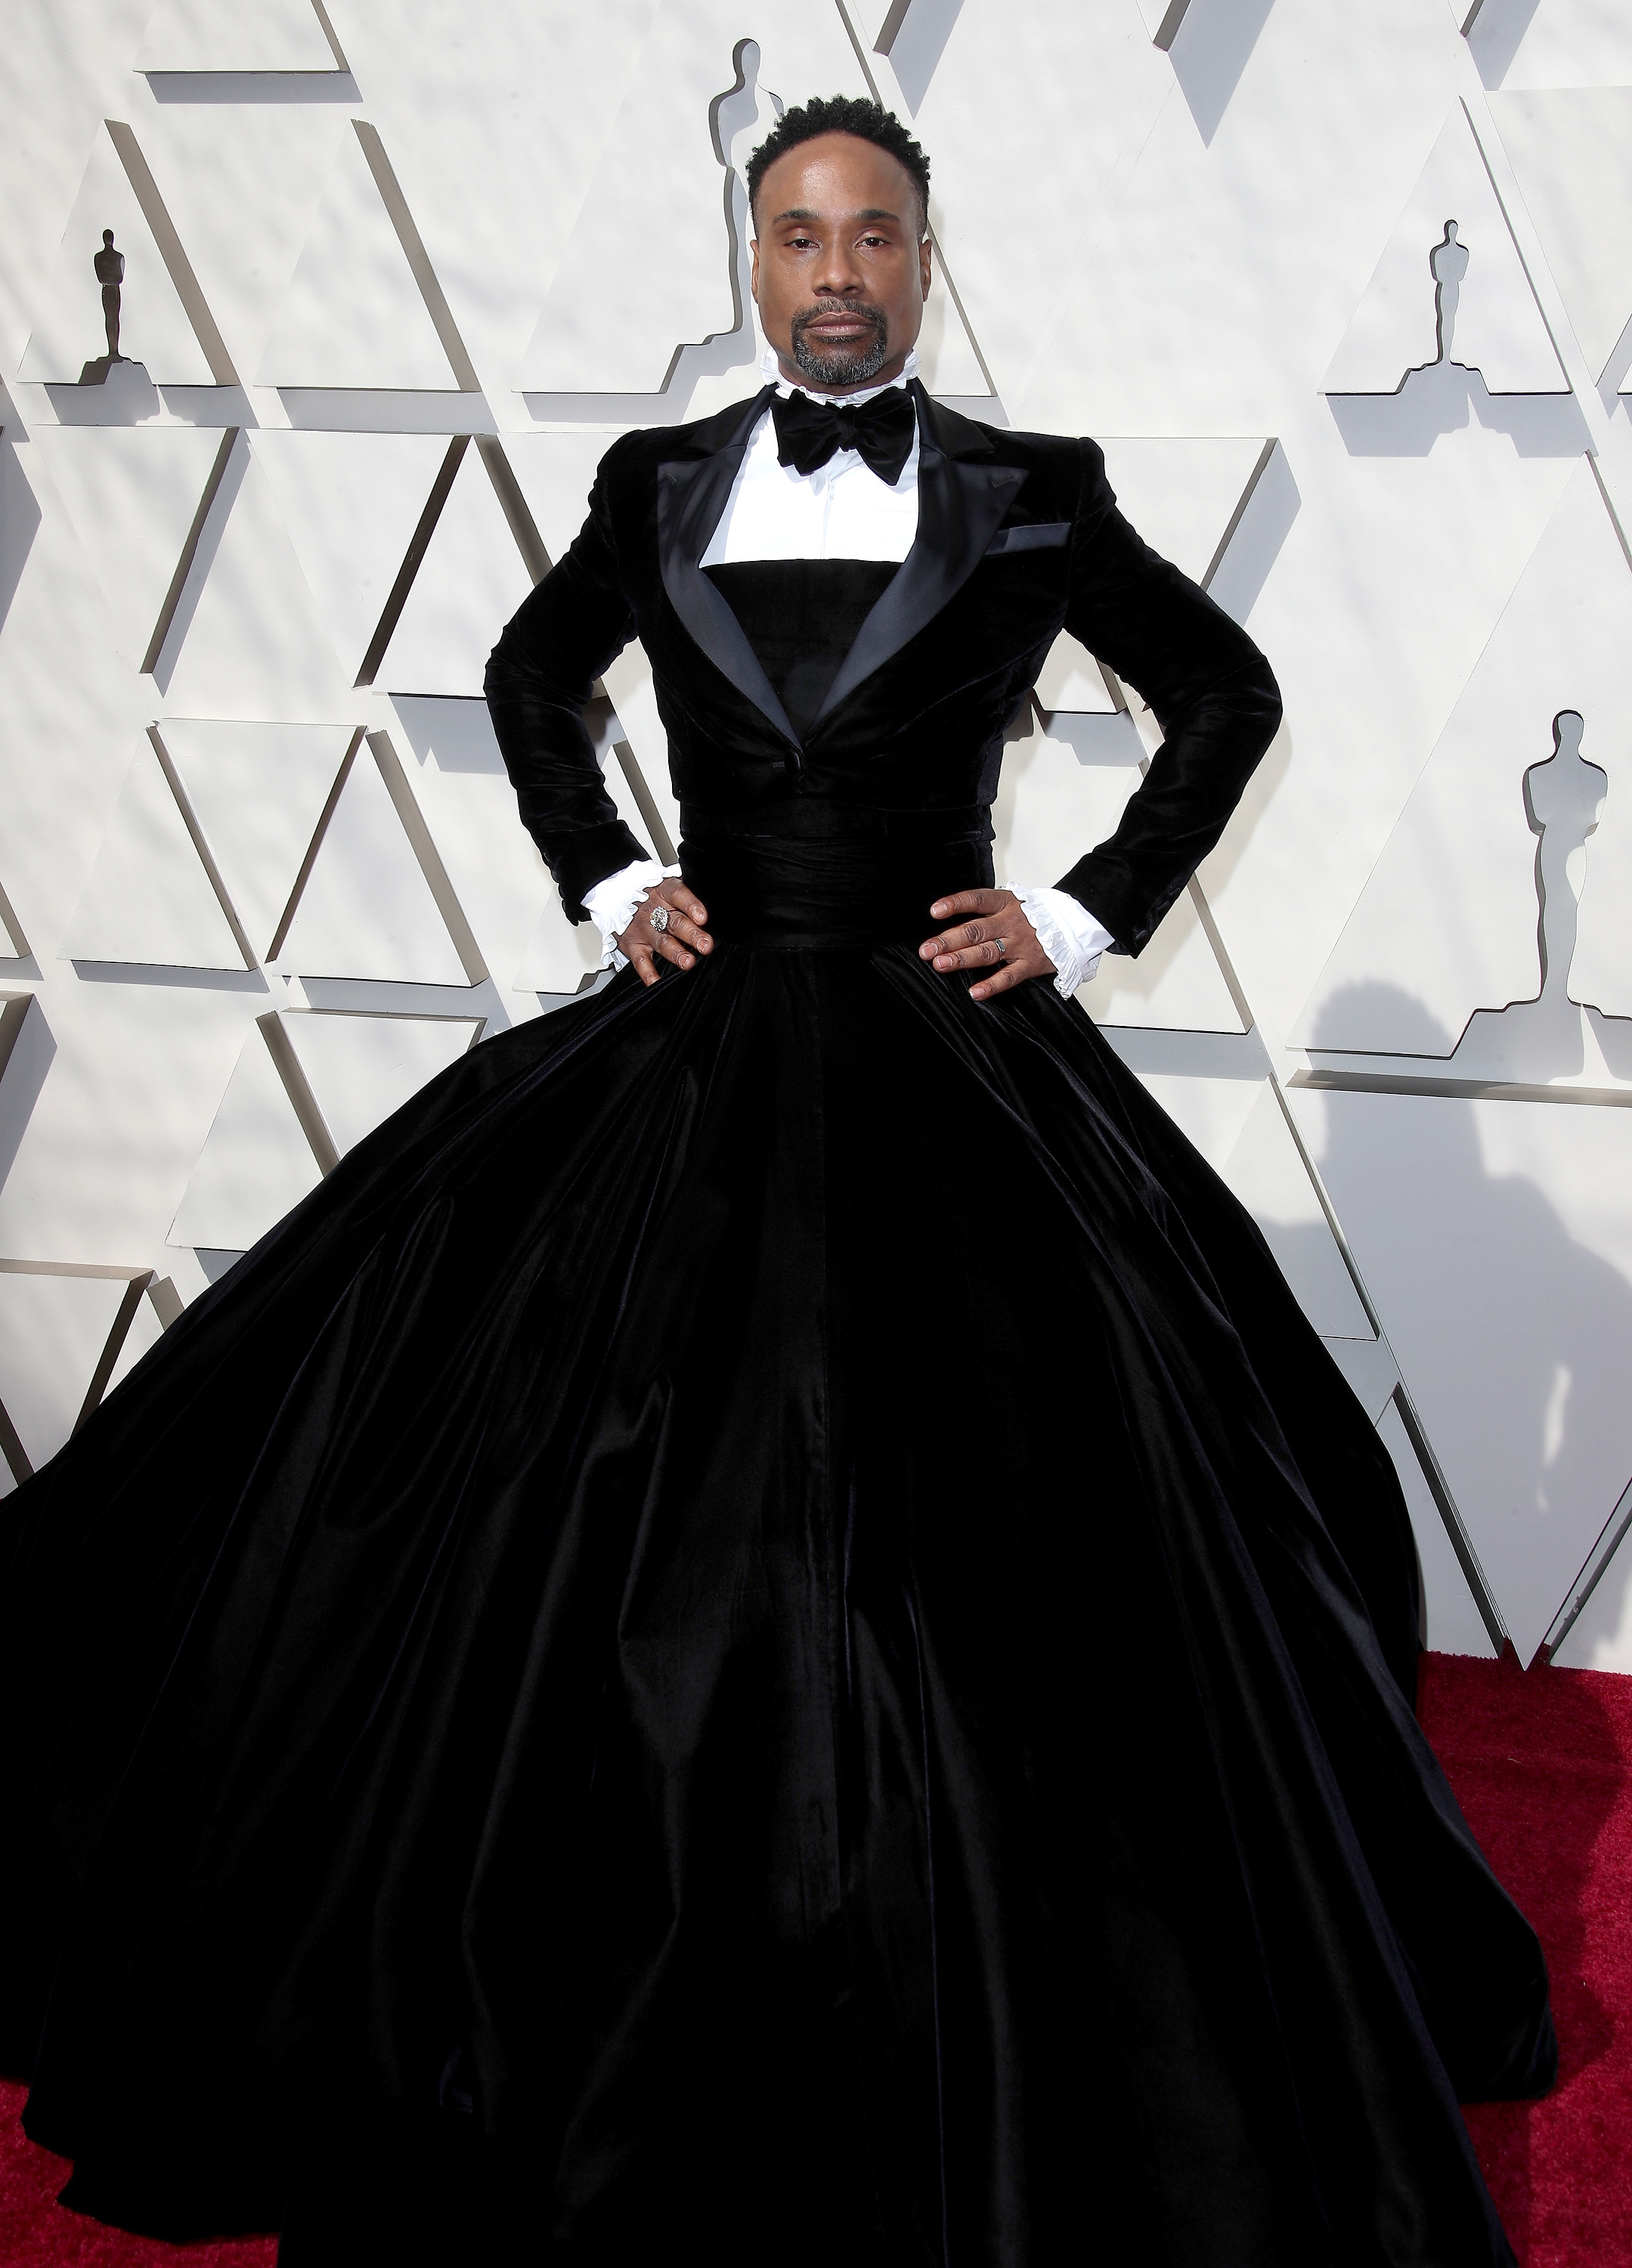 Billy Porter on the red carpet